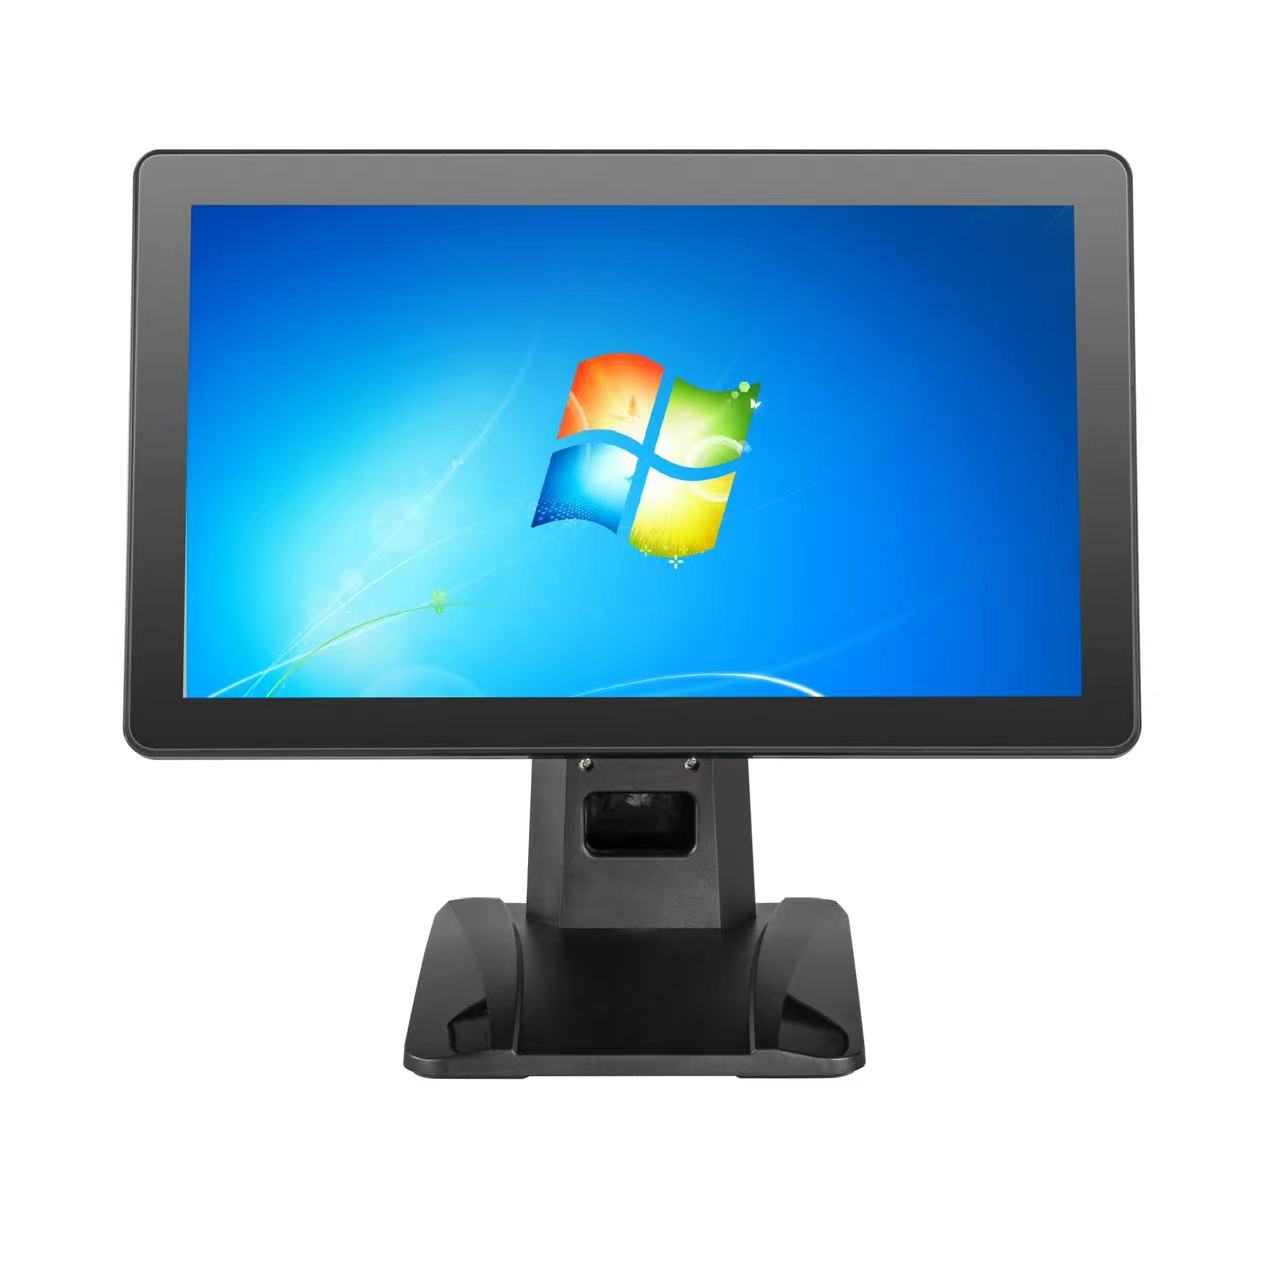 15.6 inch Touch screen Point of Sale cash register